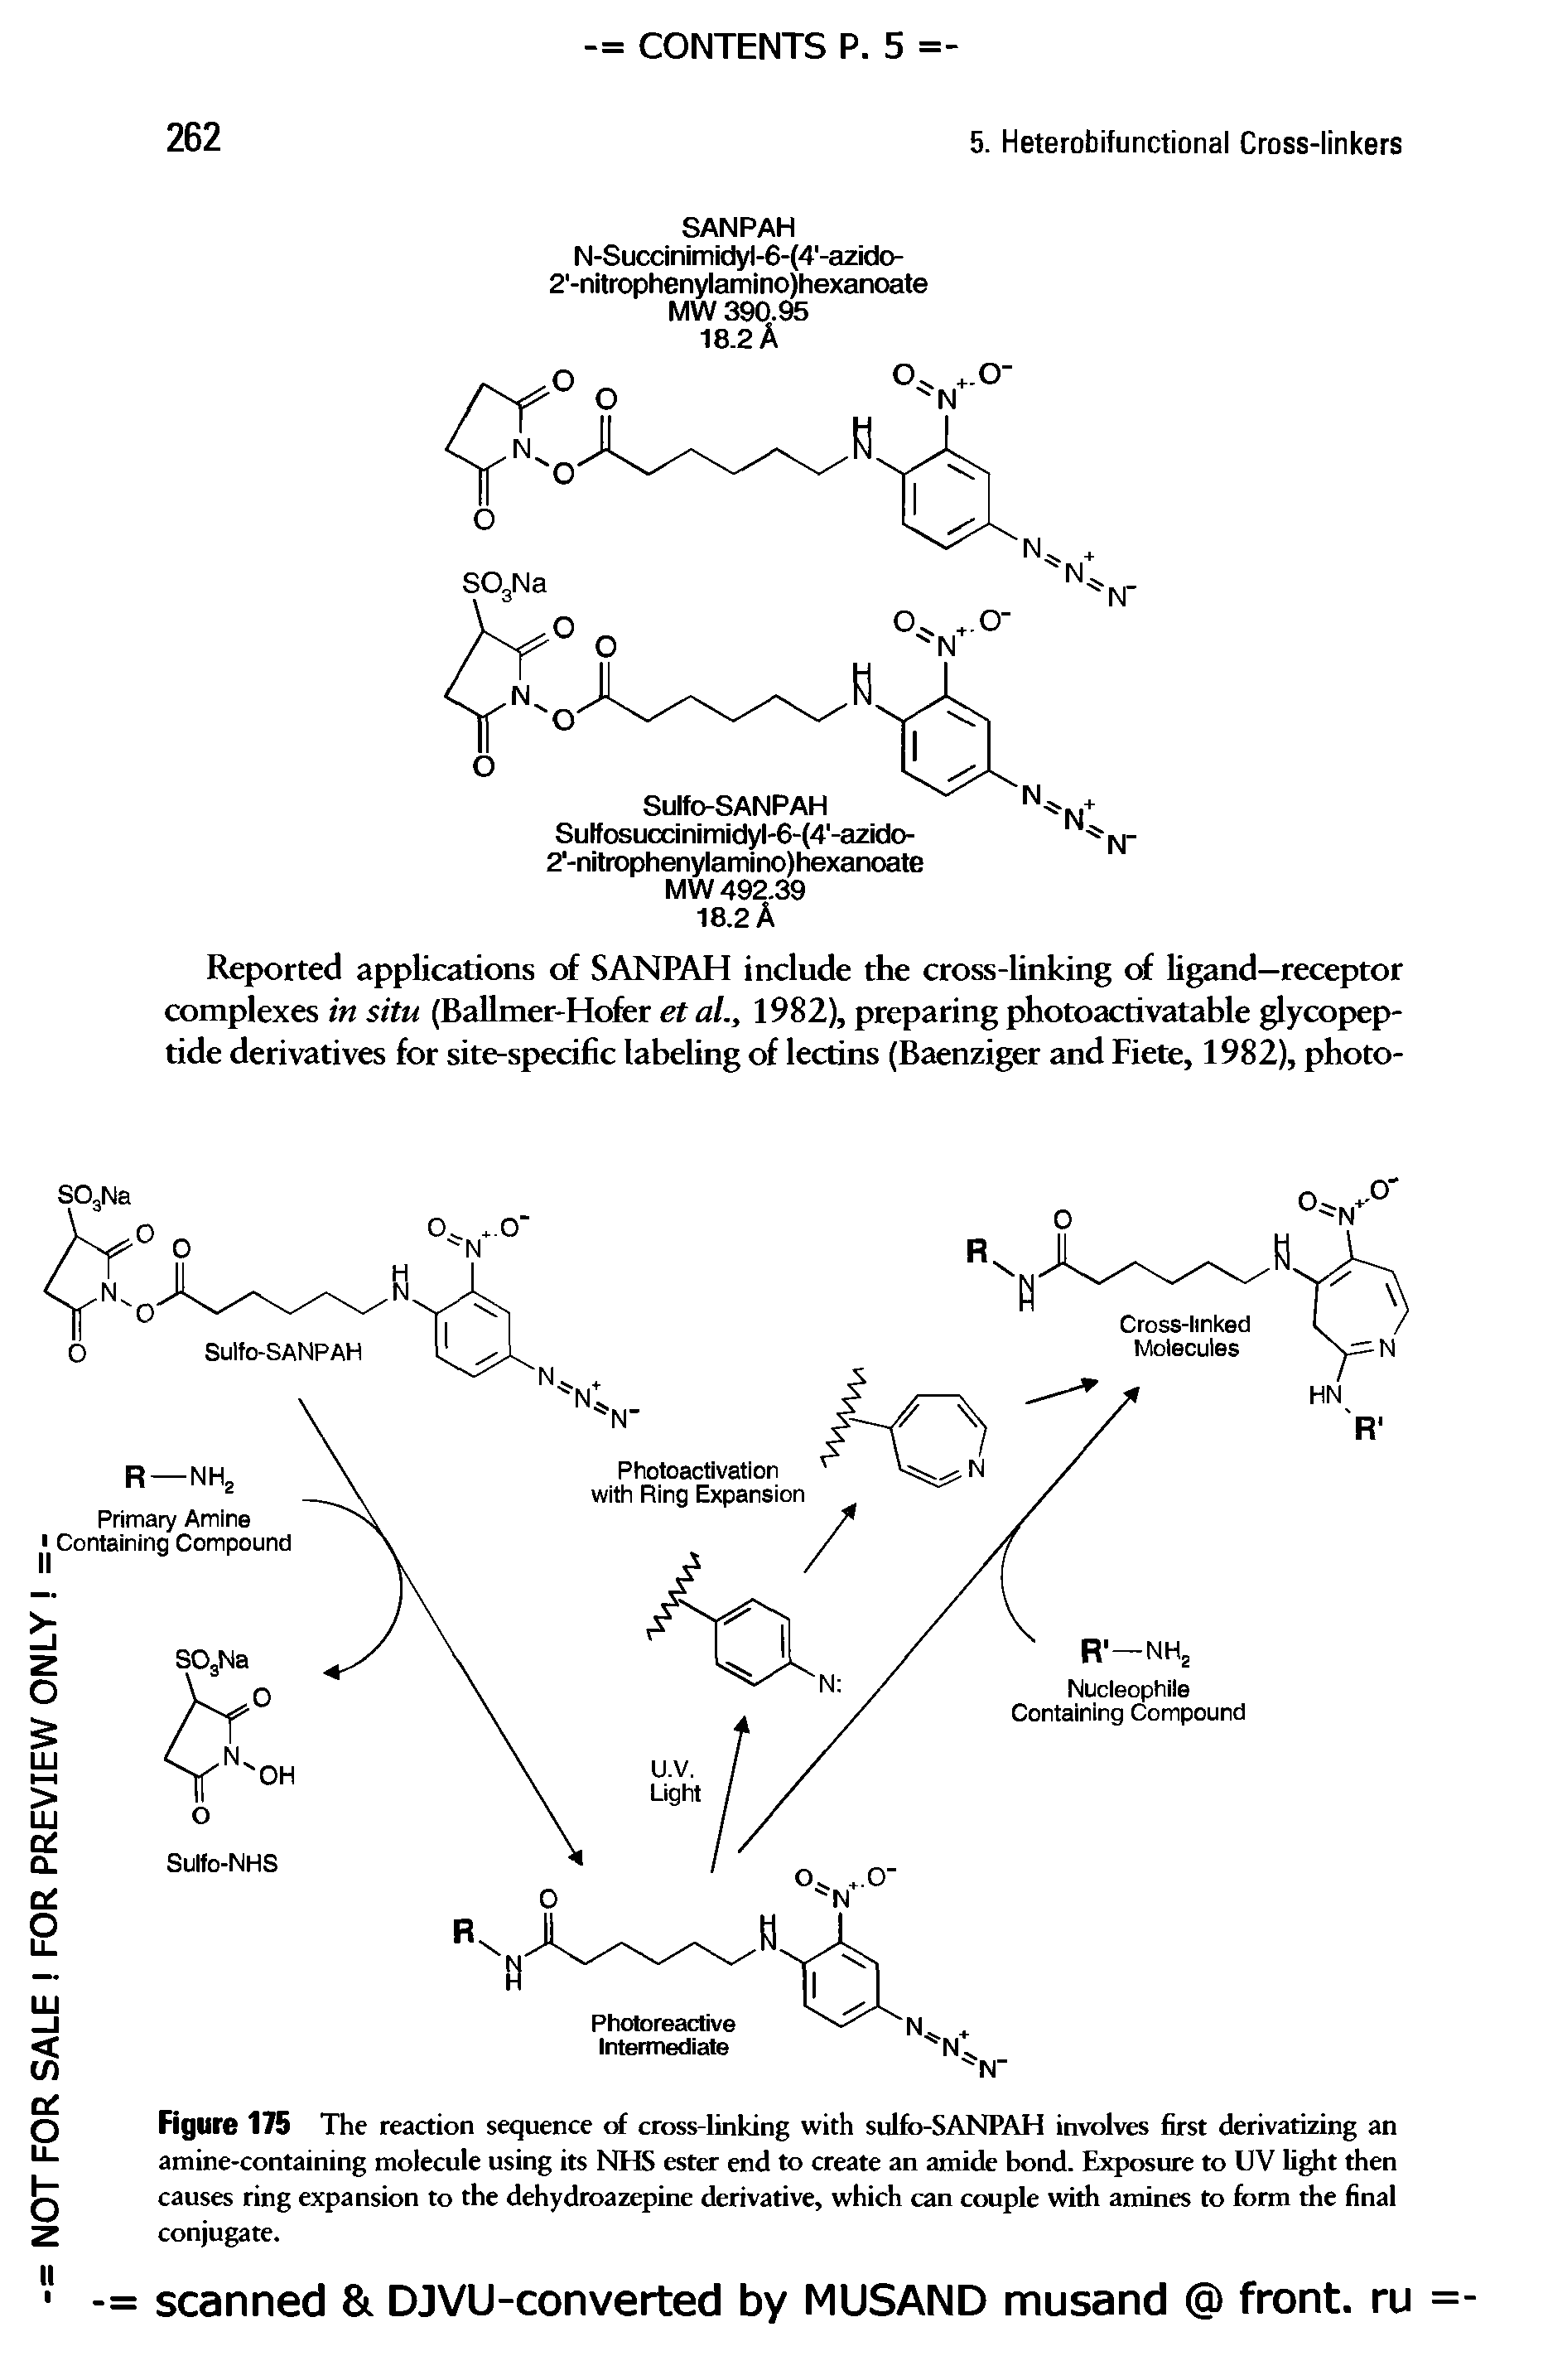 Figure 175 The reaction sequence of cross-linking with sulfo-SANPAH involves first derivatizing an amine-containing molecule using its NHS ester end to create an amide bond. Exposure to UV light then causes ring expansion to the dehydroazepine derivative, which can couple with amines to form the final conjugate.